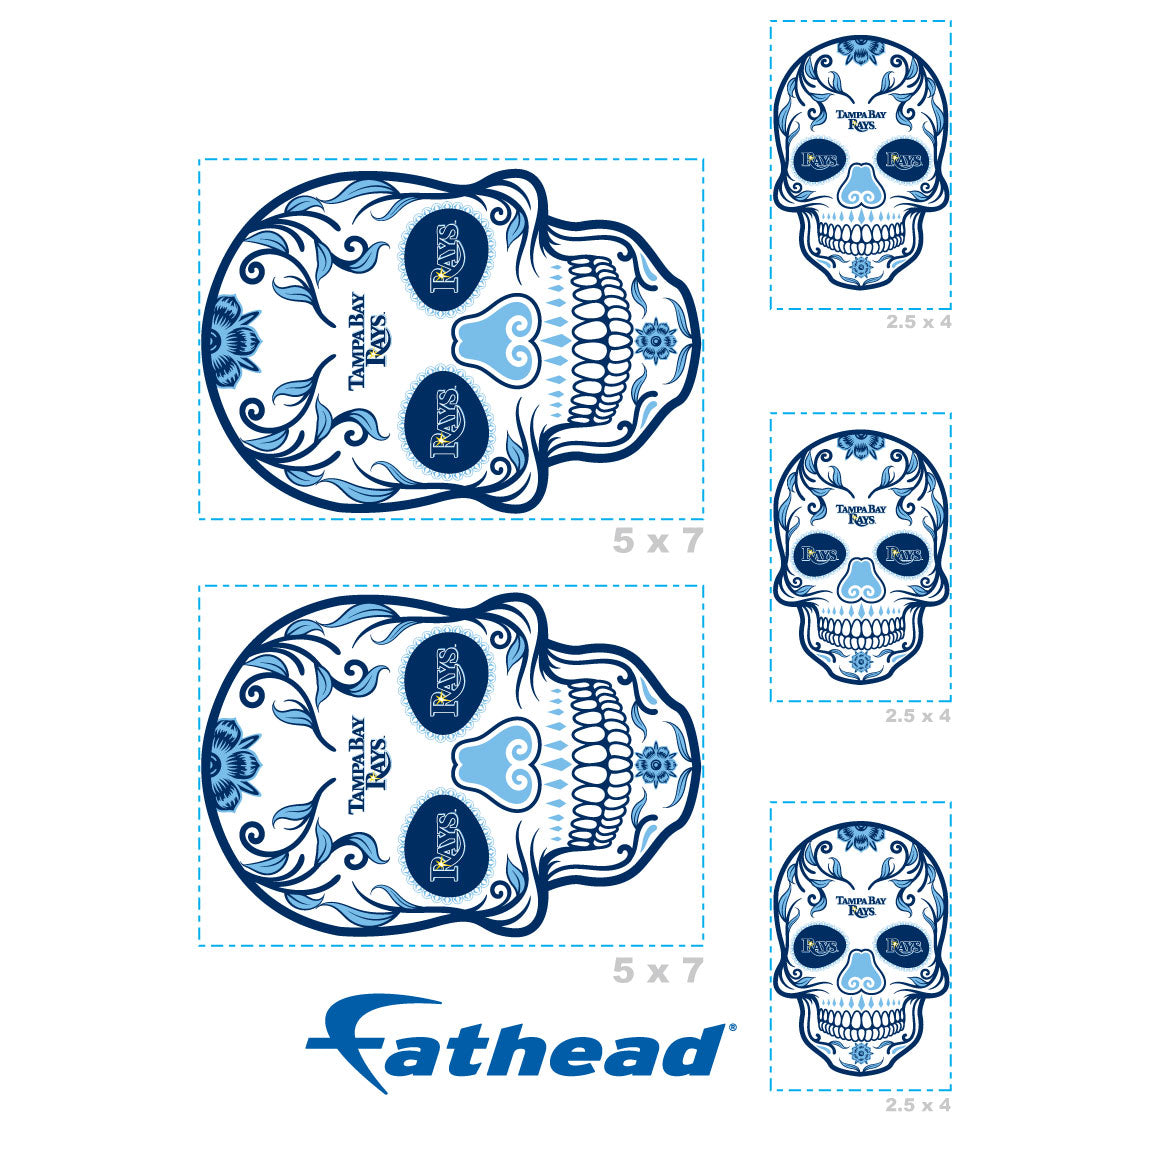 Sheet of 5 -Tampa Bay Rays: Skull Minis - Officially Licensed MLB Removable Adhesive Decal